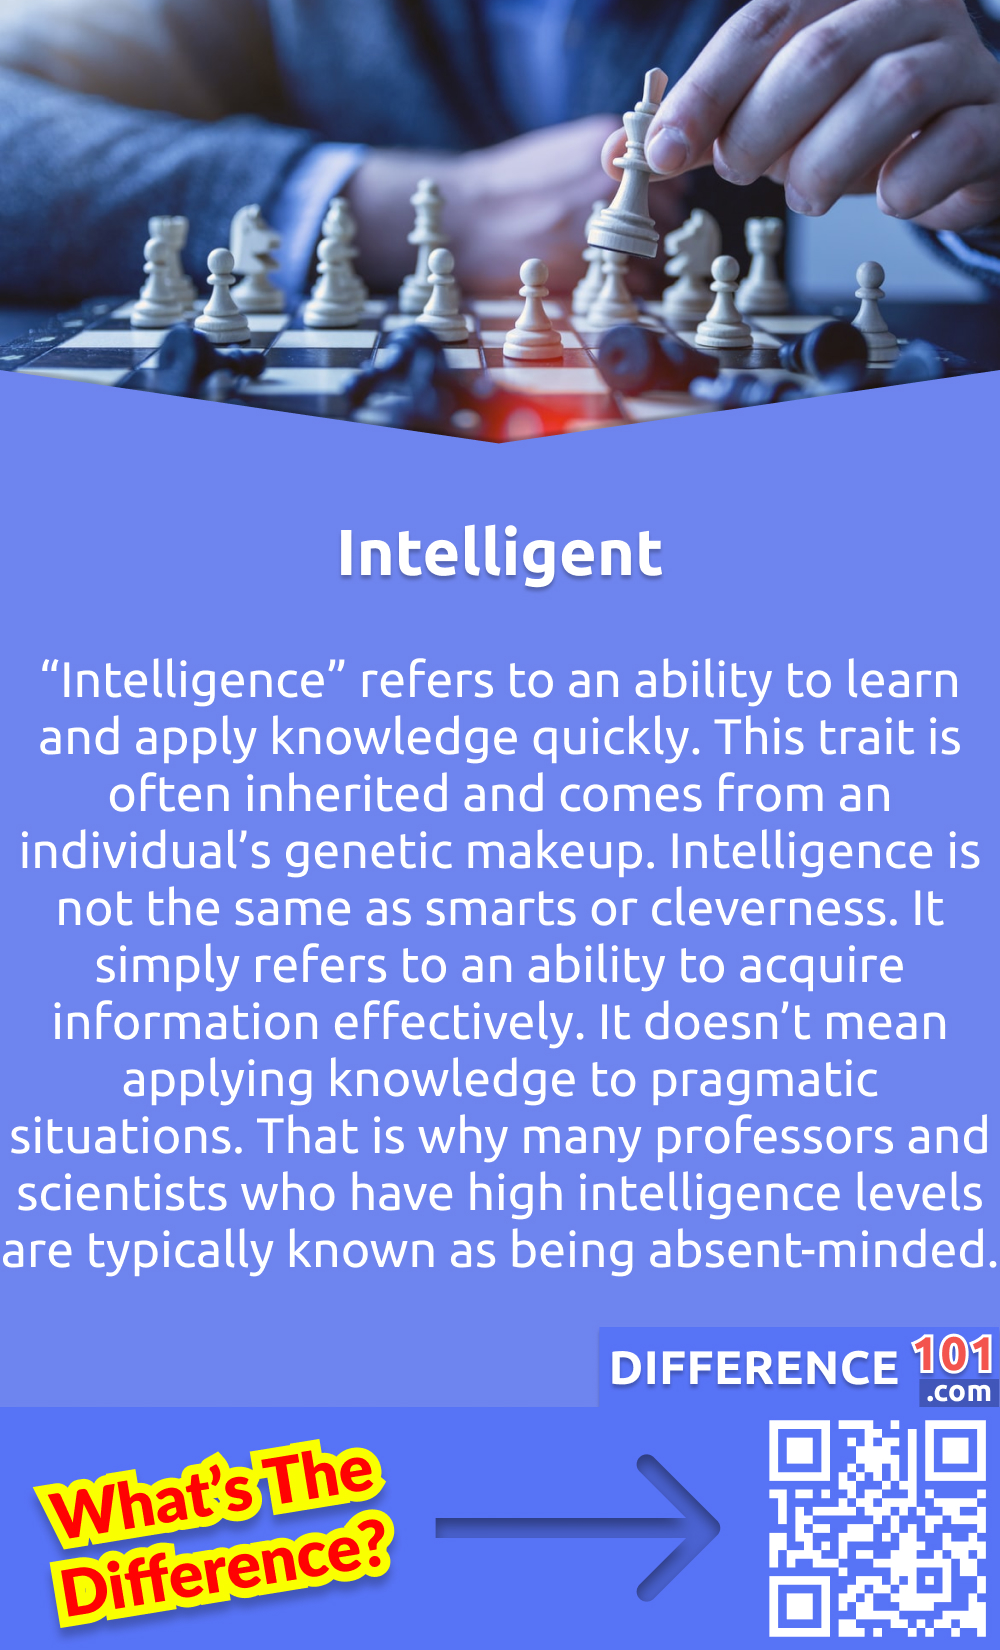 What Does Intelligence Mean? “Intelligence” refers to an ability to learn and apply knowledge quickly. This trait is often inherited and comes from an individual’s genetic makeup. Intelligence is not the same as smarts or cleverness. It simply refers to an ability to acquire information effectively. It doesn’t mean applying knowledge to pragmatic situations. That is why many professors and scientists who have high intelligence levels are typically known as being absent-minded.